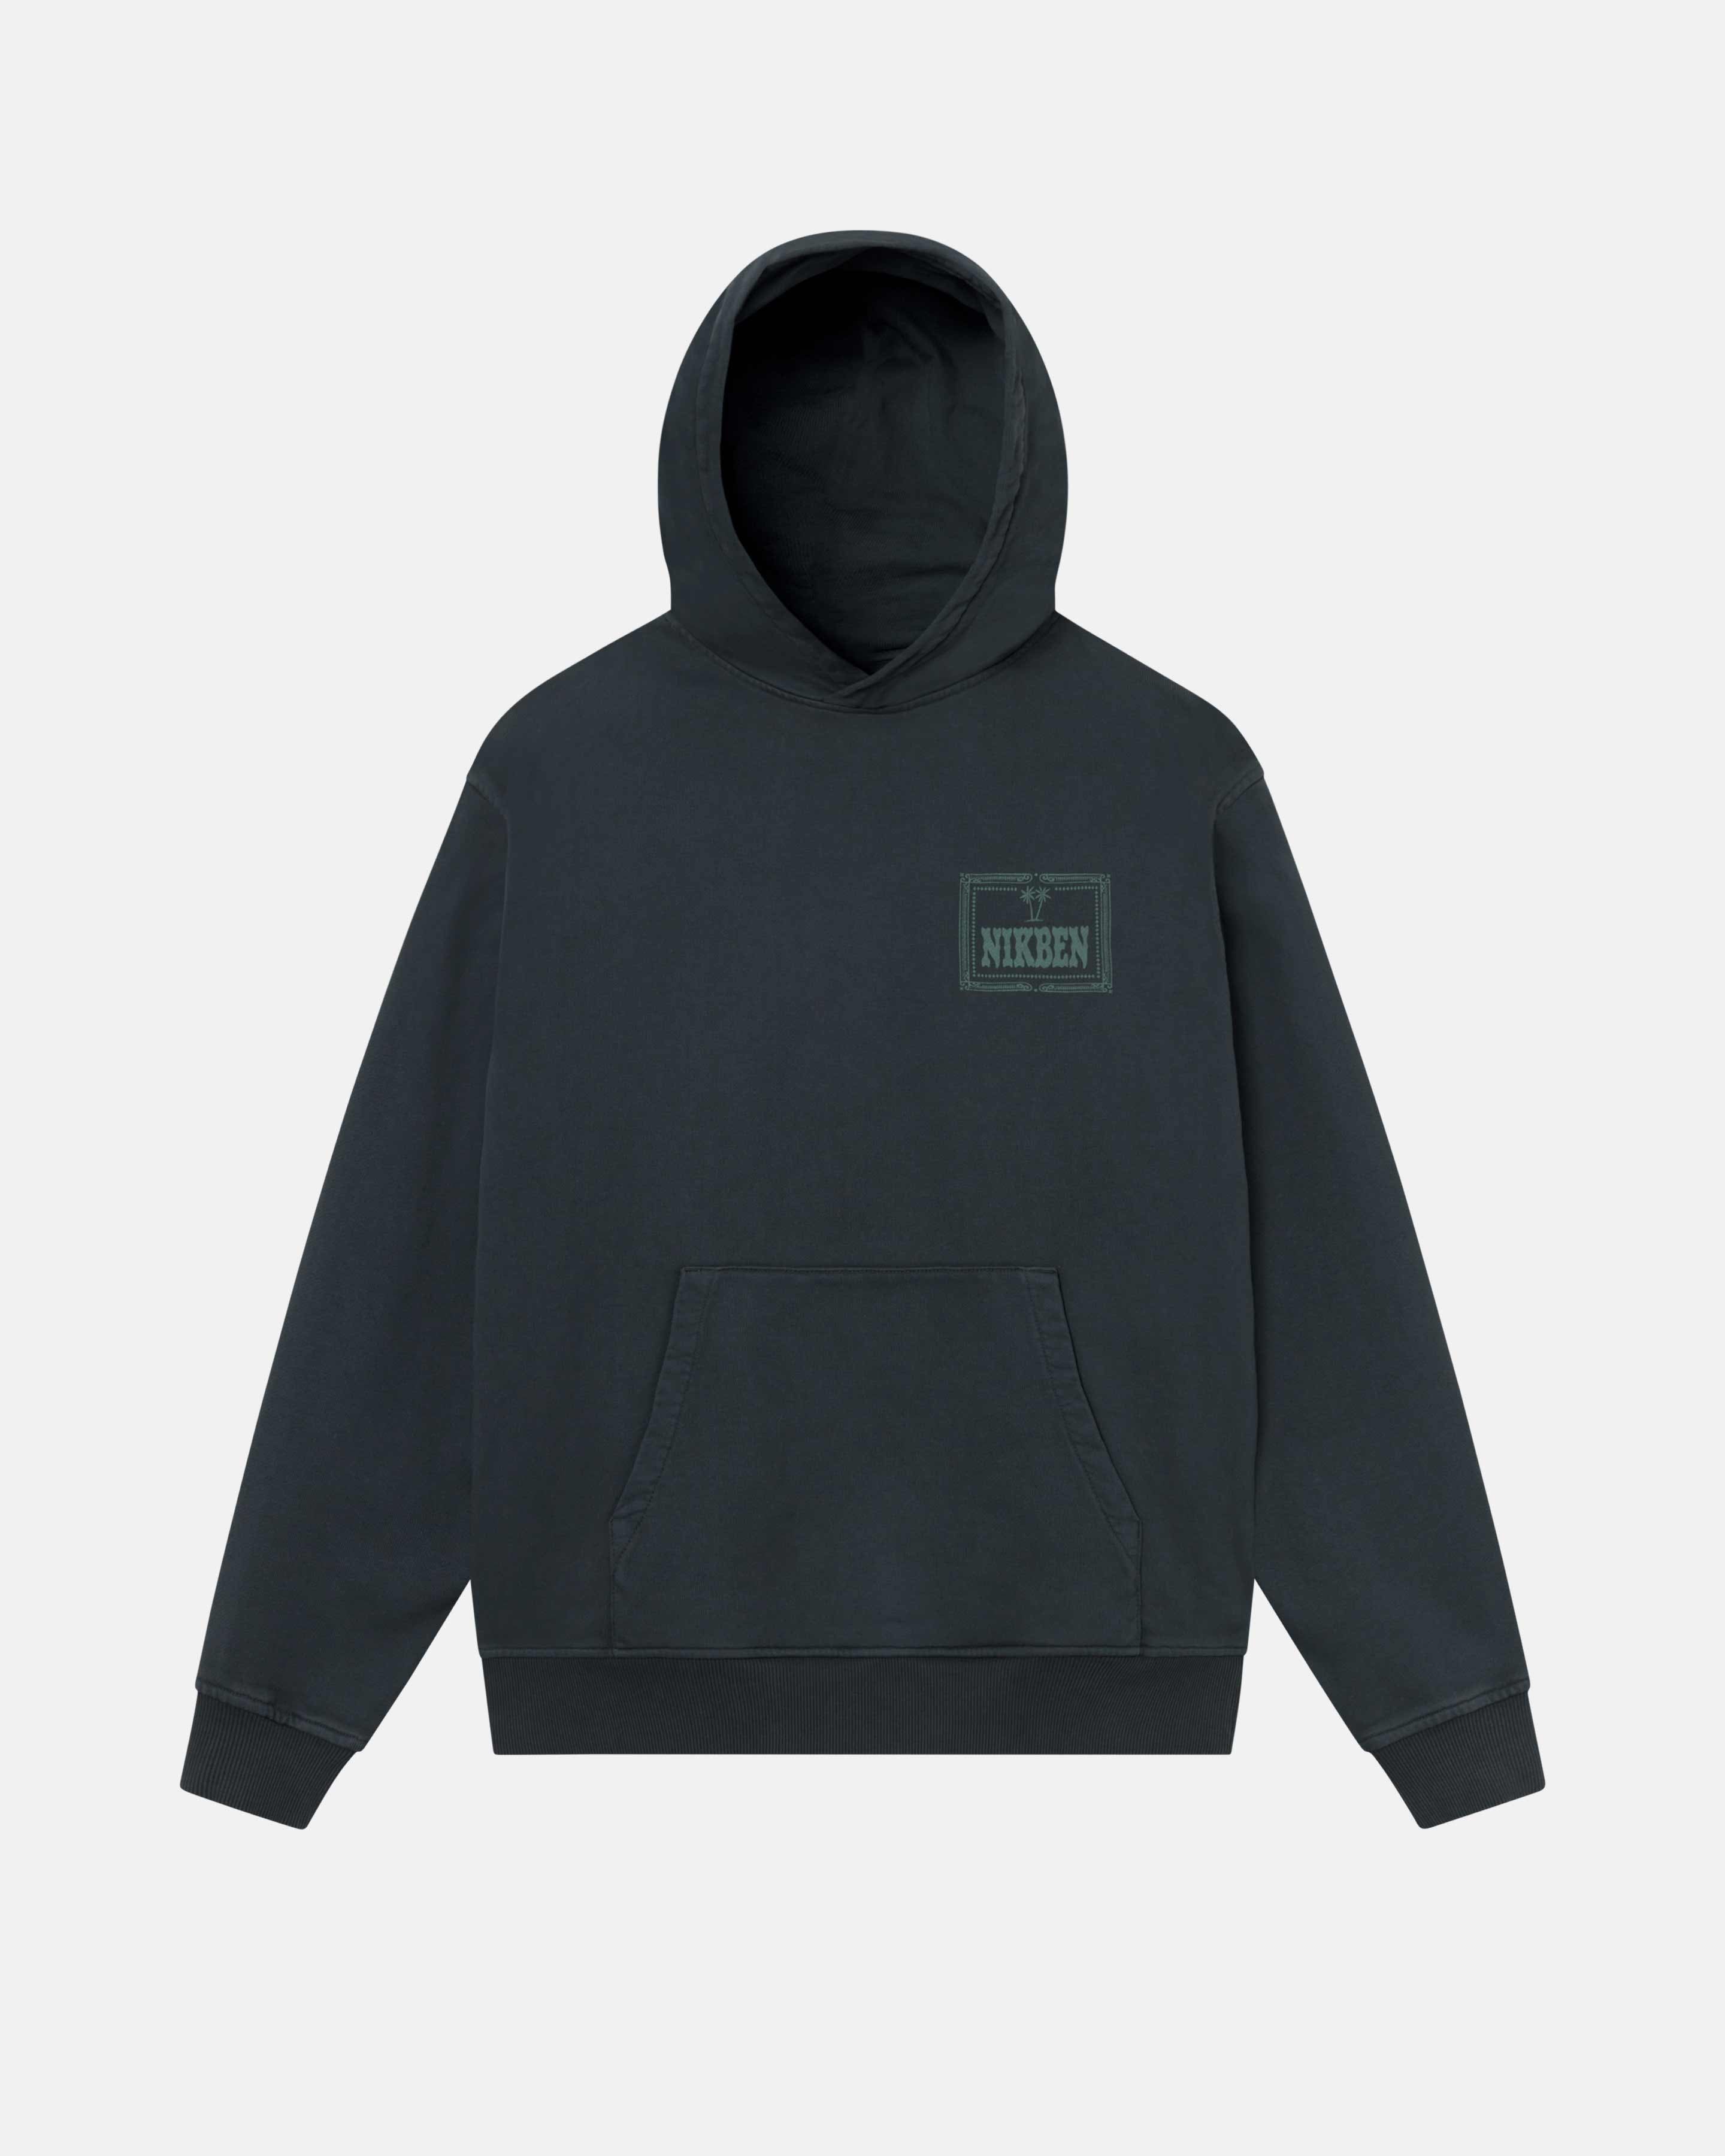 A black hoodie with a green Nikben chest logo